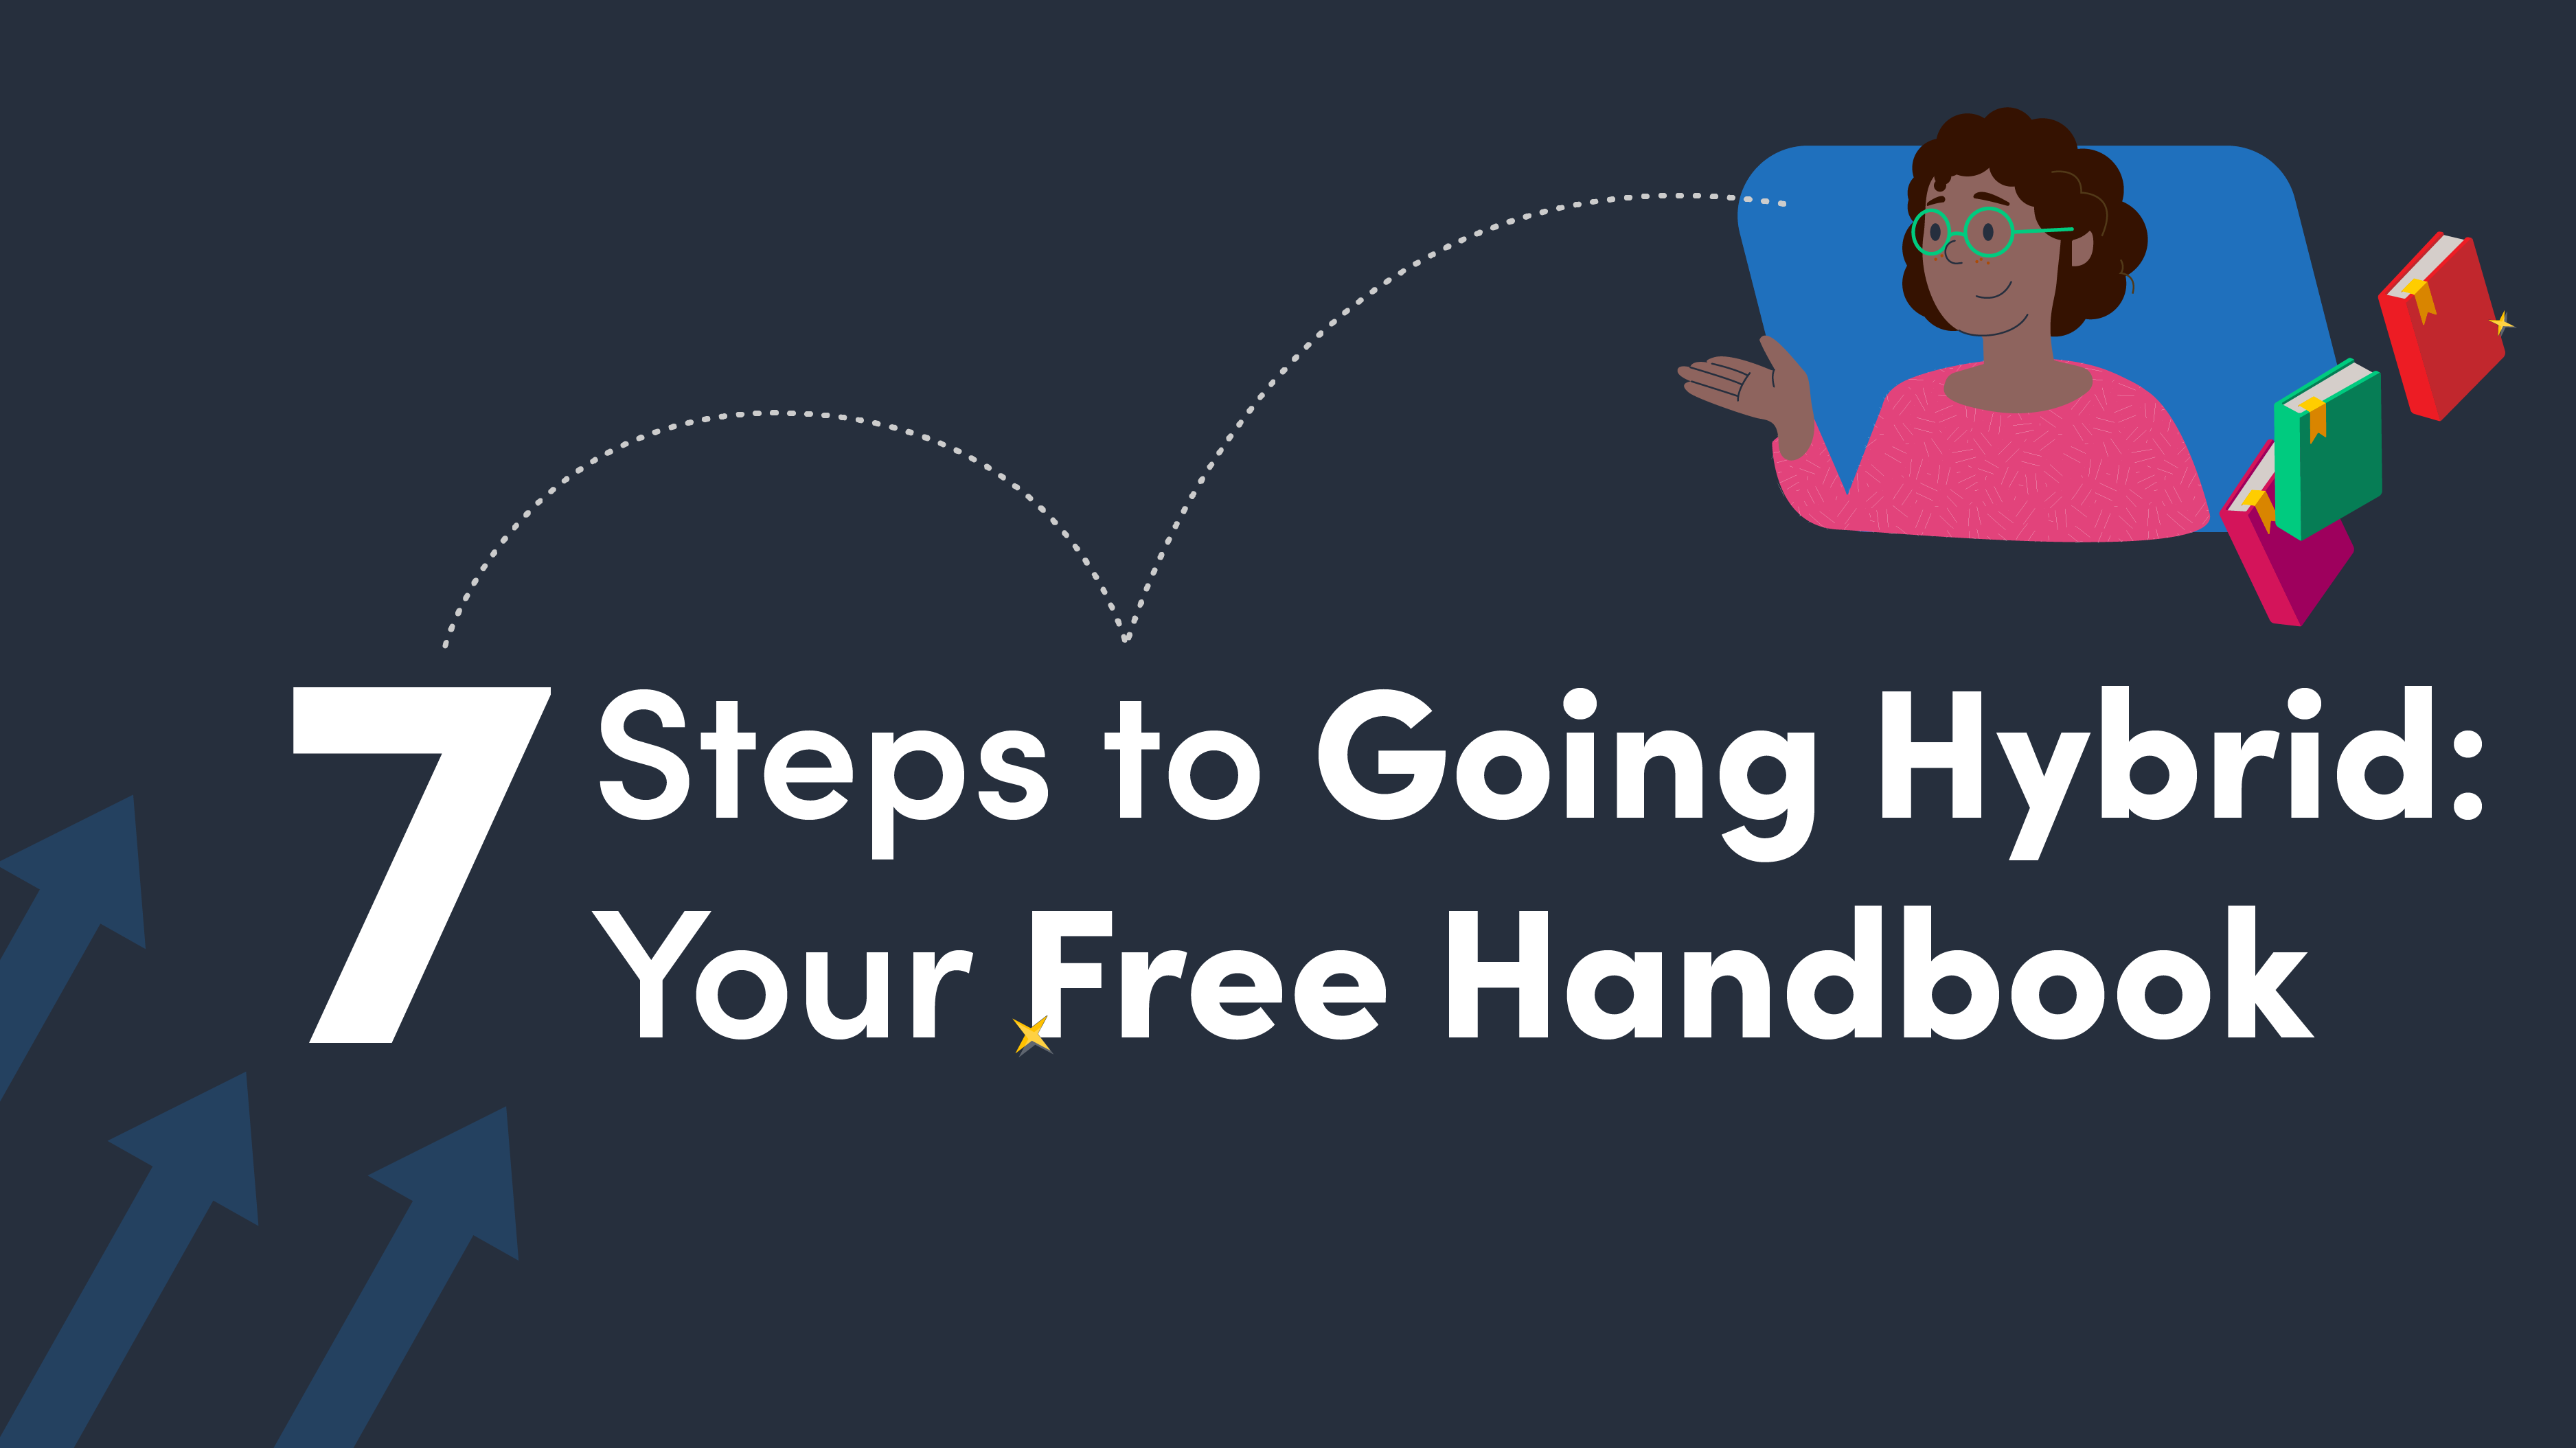 7 Steps to Going Hybrid: Your Free Handbook